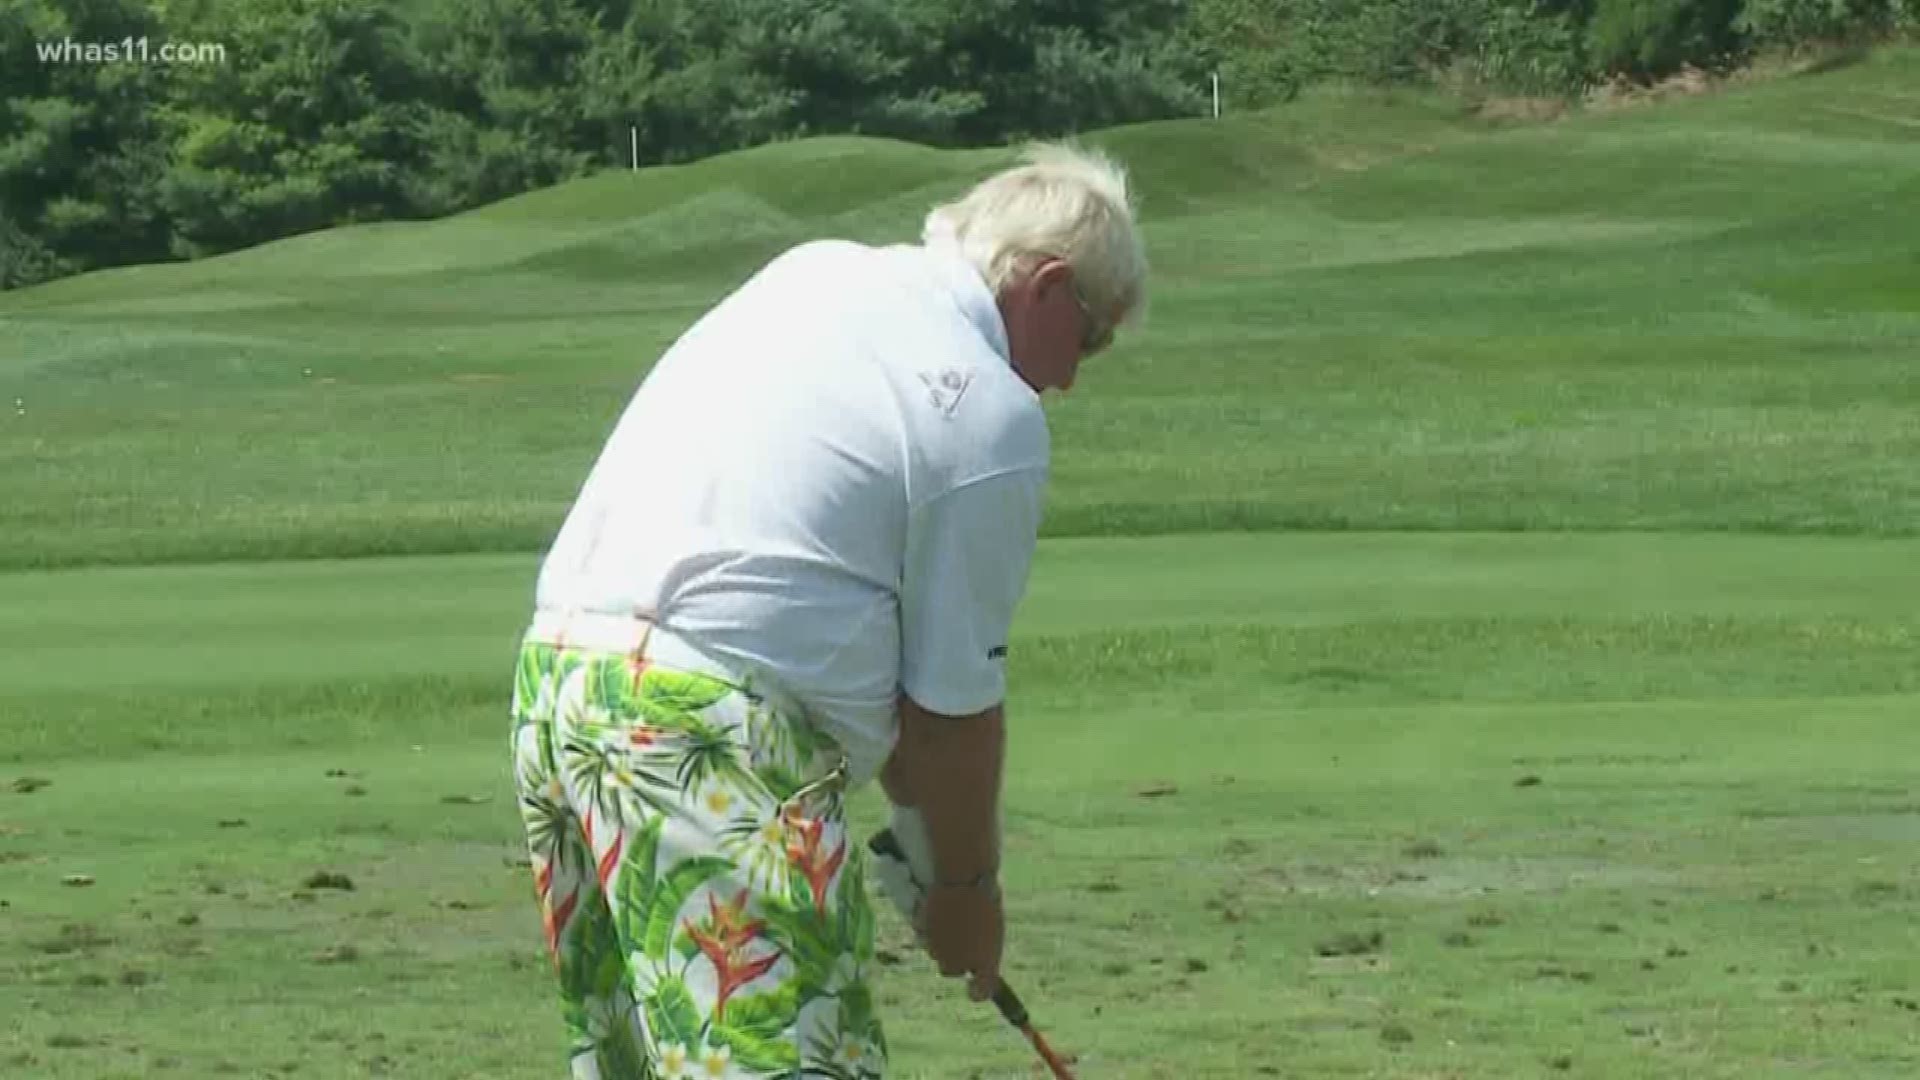 Often times you don't see a guy smoking a cigarette while hitting balls on the golf range. But you do when John Daly enters your tournament.